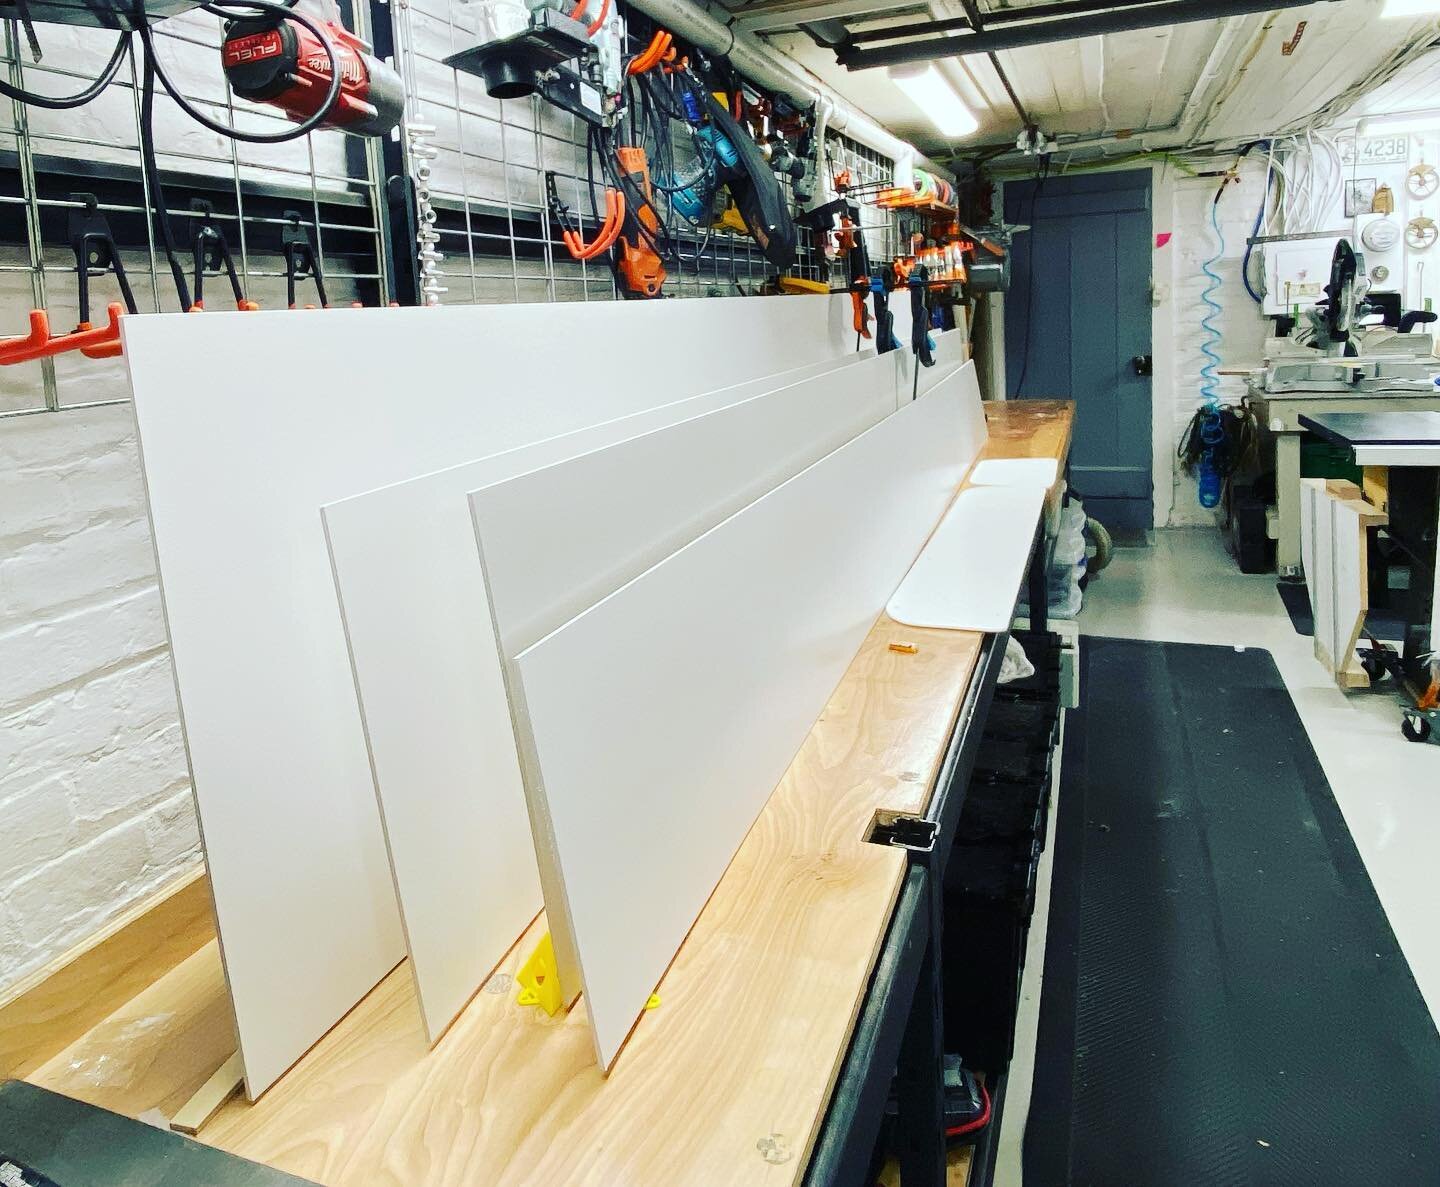 Our panels are painted by hand with 5 coats under a side light. The texture is minimal and enticing. It&rsquo;s an integral part of the van and one we take great care and pride in. 🥰🤩

#webuildvans #sodadecovans #vansbysodadeco #sprintervan #sprint